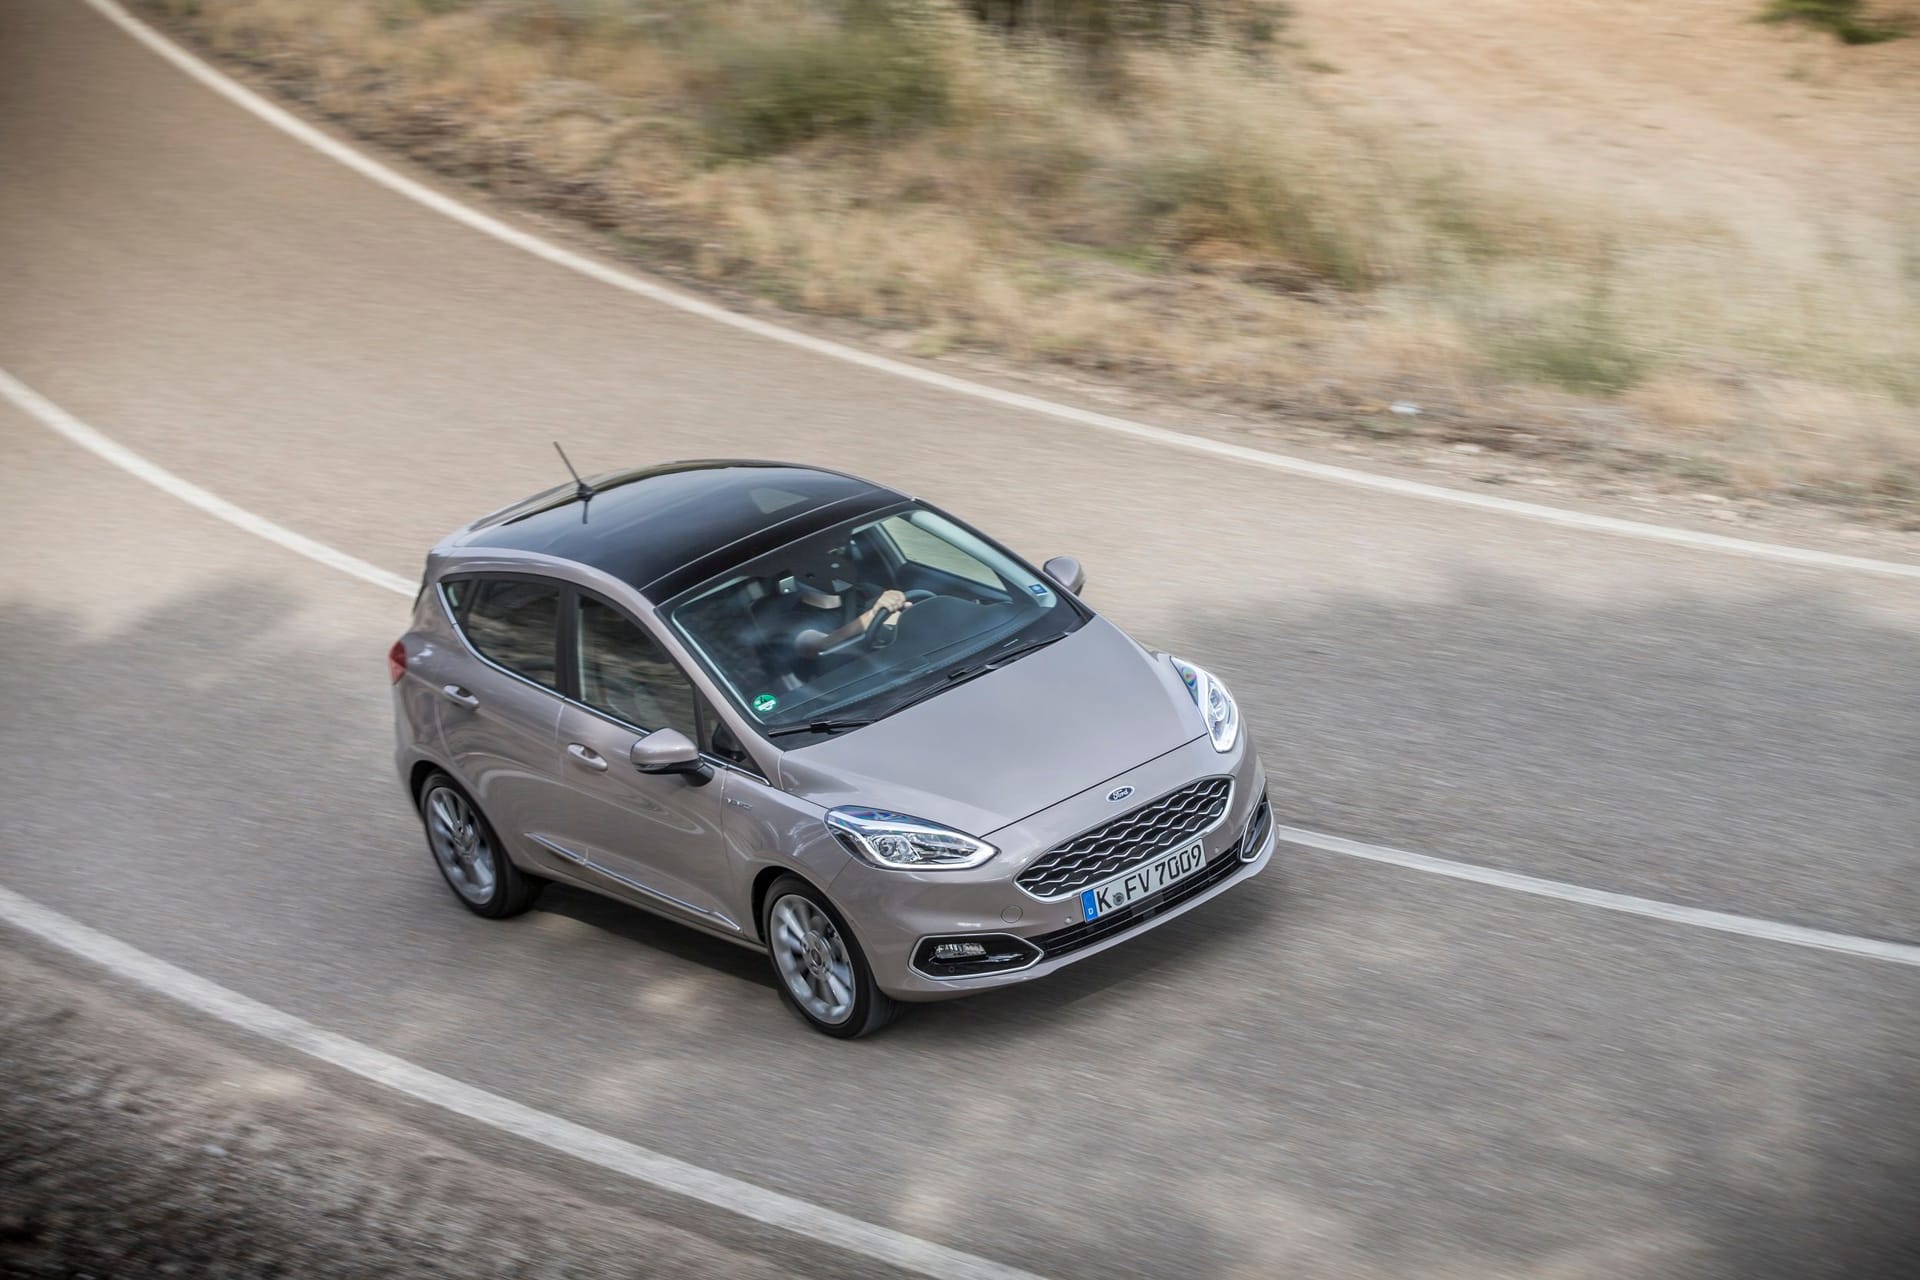 Ford Fiesta 1.0 EcoBoost: Note 5